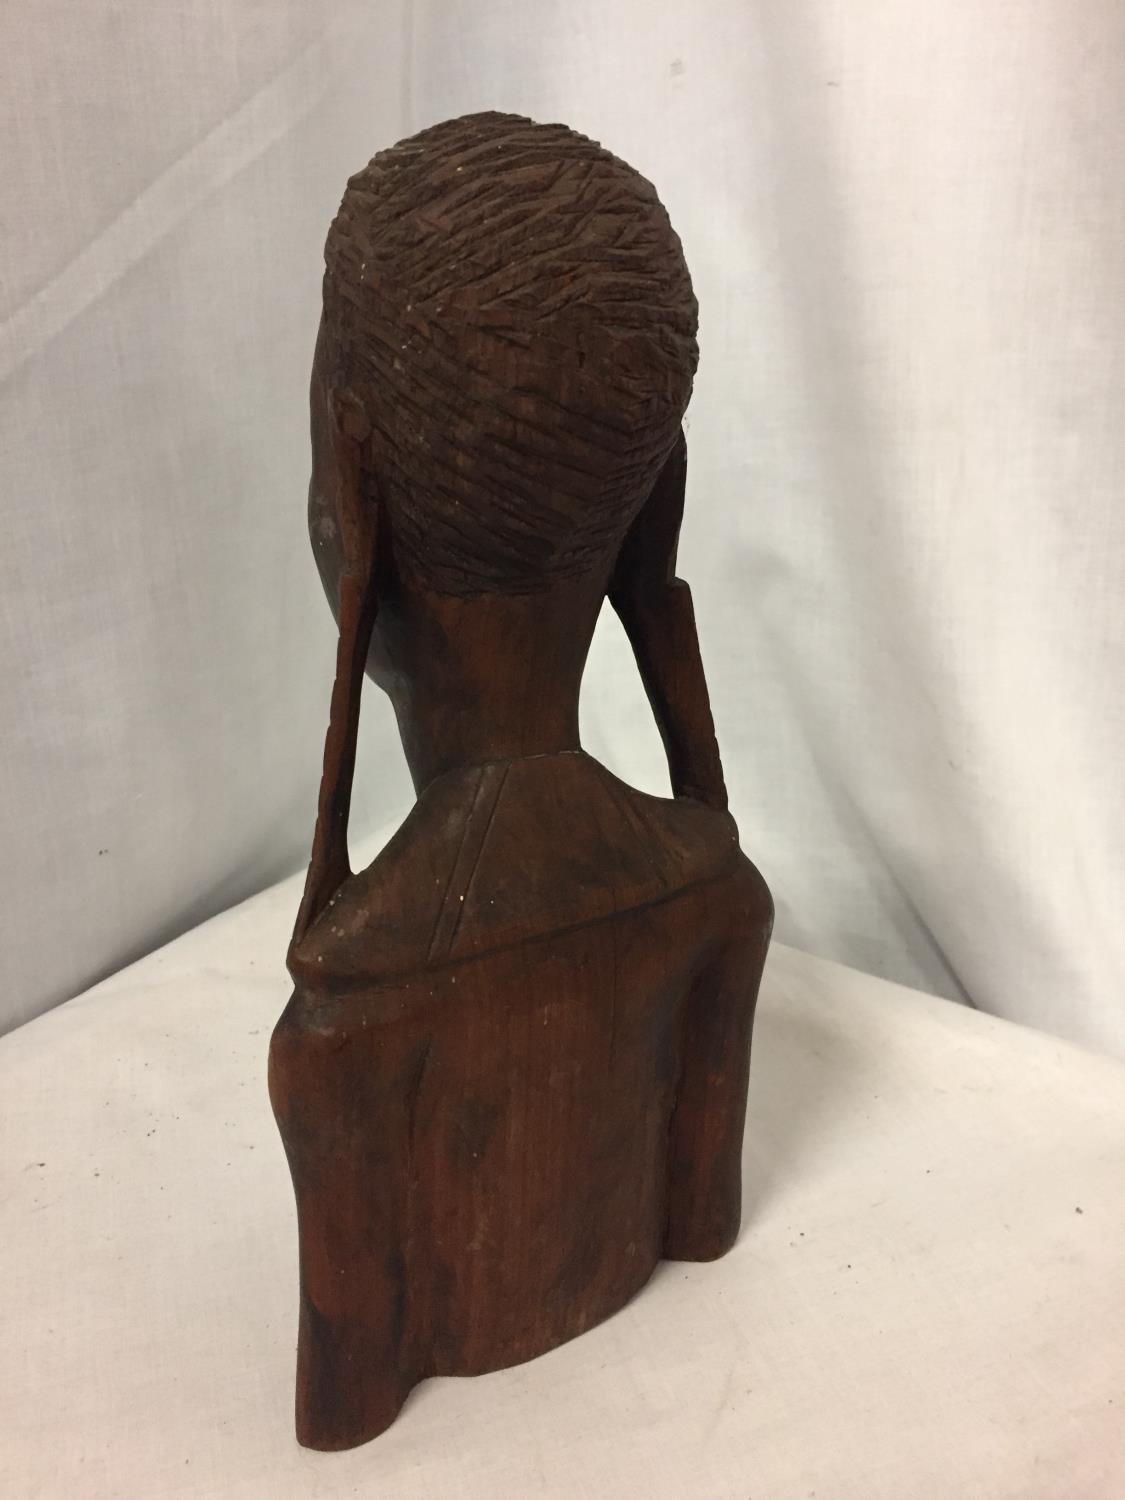 AN AFRICAN TRIBAL WOODEN CARVED BUST MODEL. H 30CM - Image 3 of 3